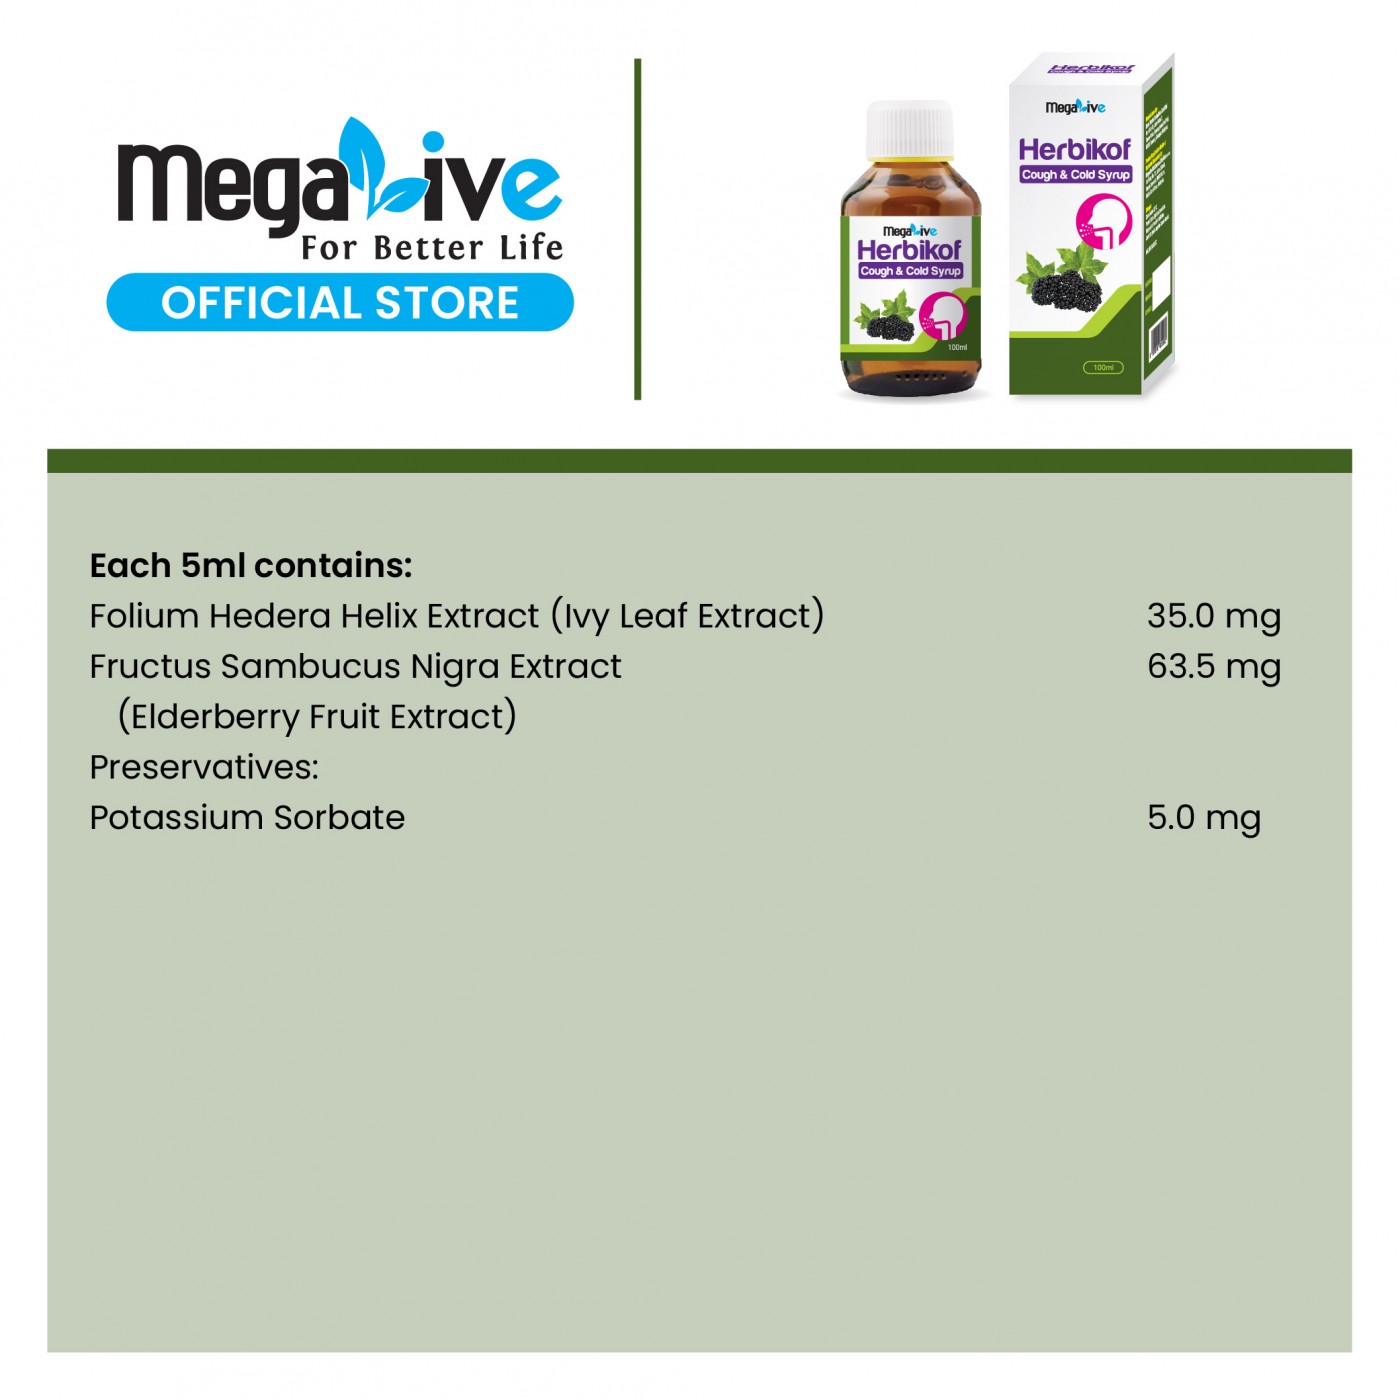 MegaLive Herbikof Cough & Cold Syrup